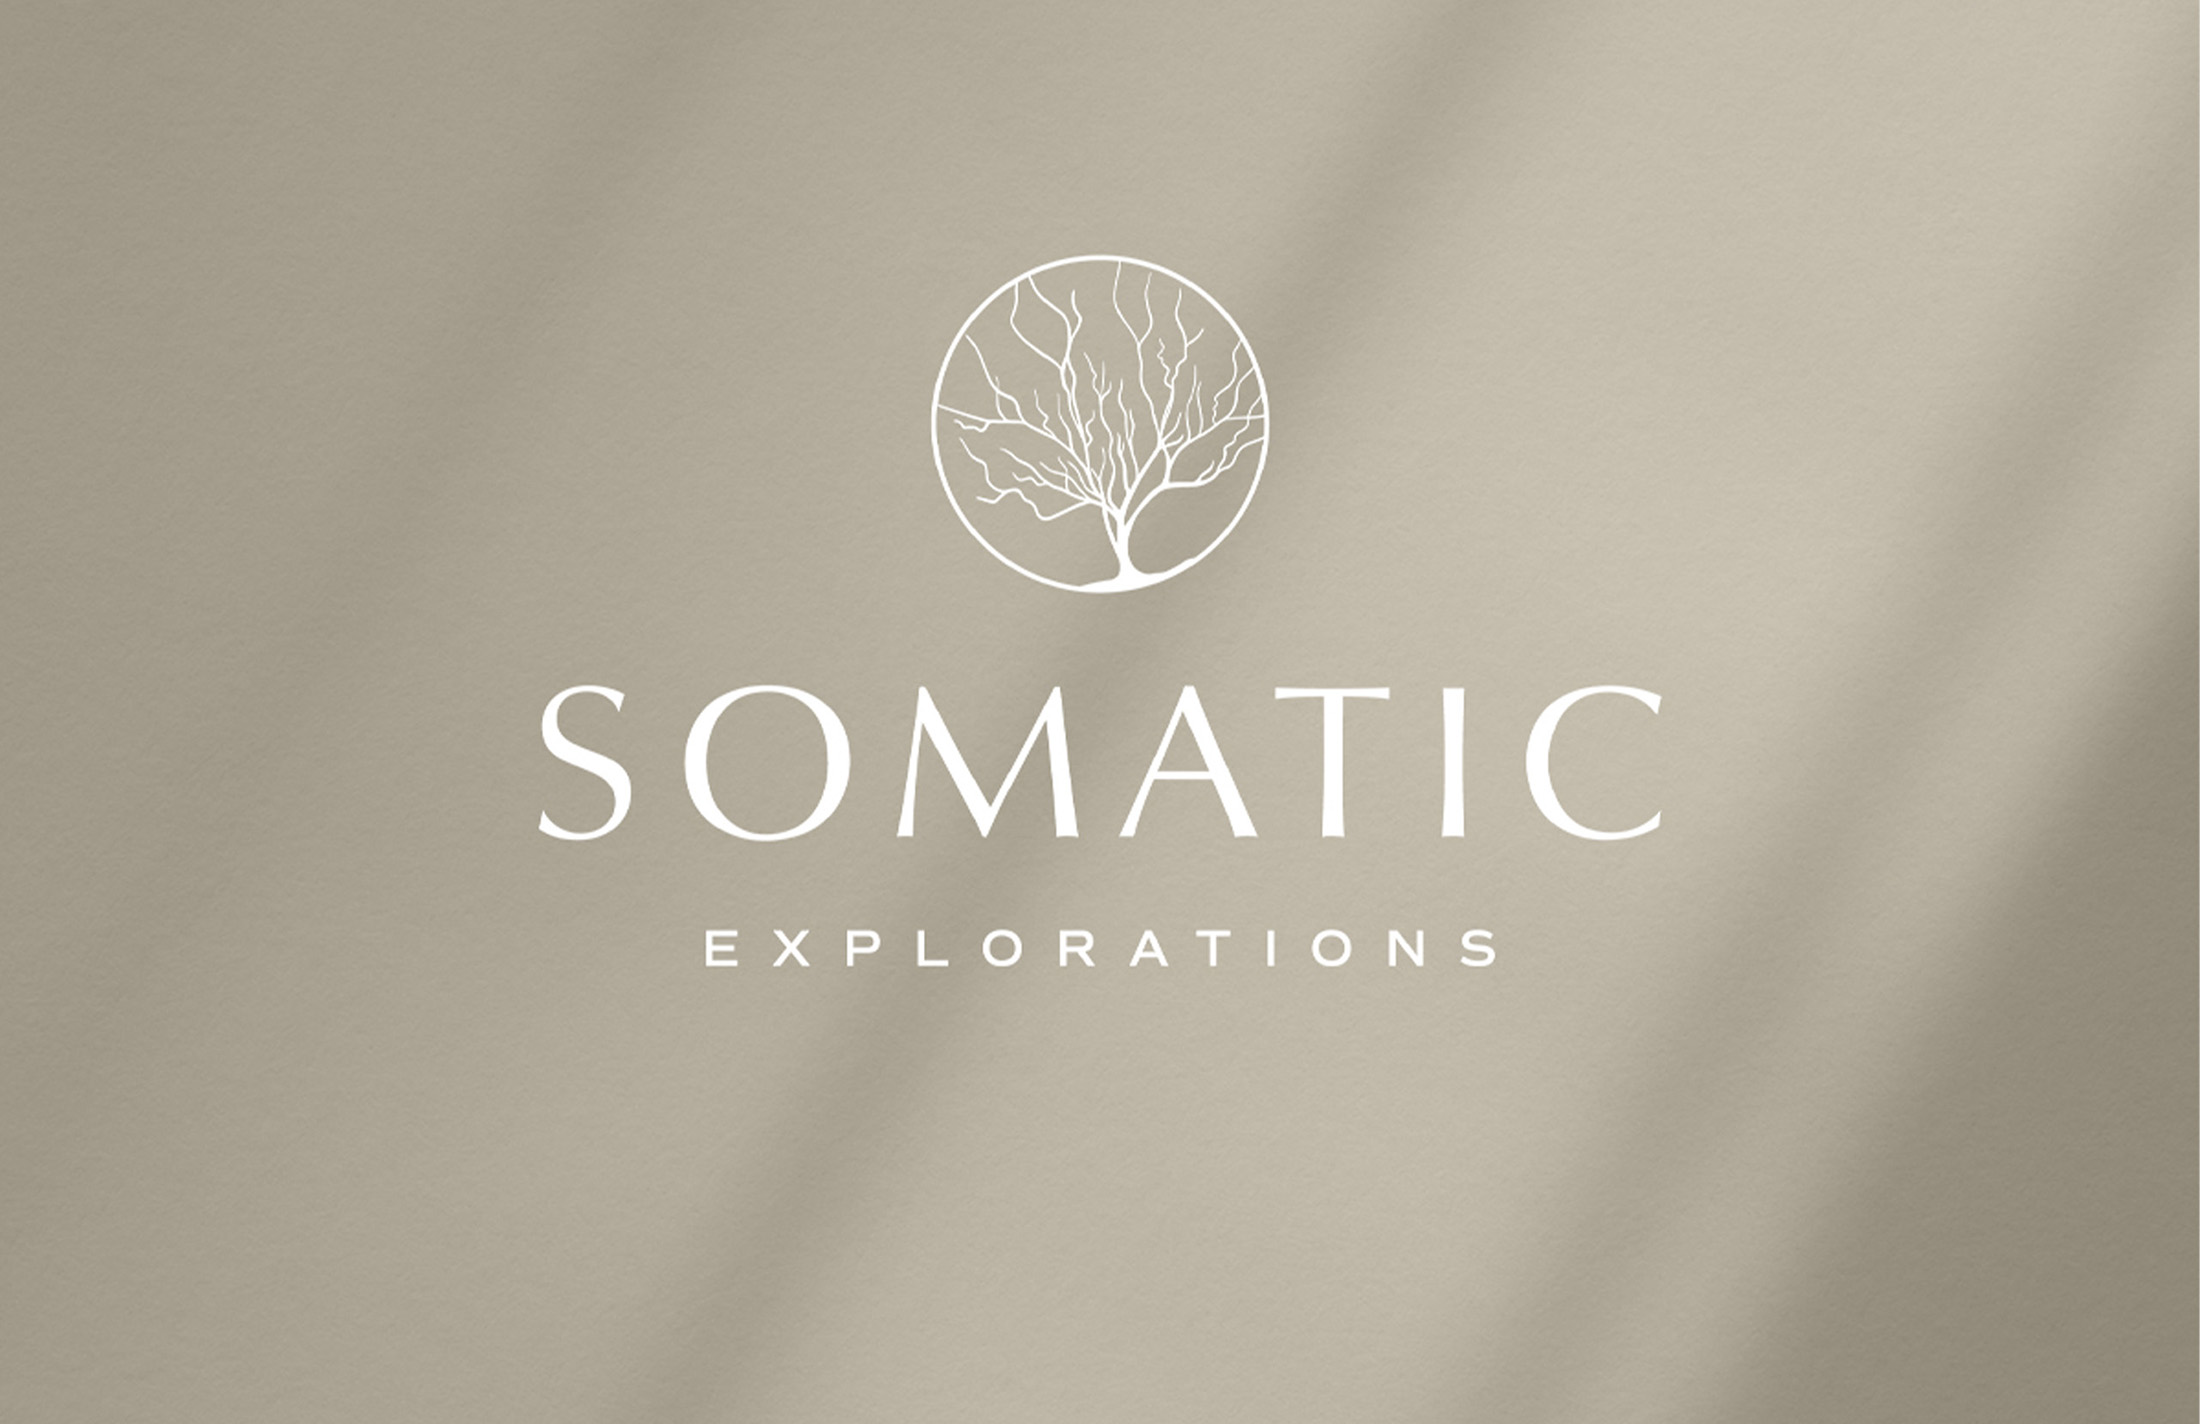 Brand logo mockup - Somatic Explorations - Whiskey and Red Small Business Branding and Website Design Packages